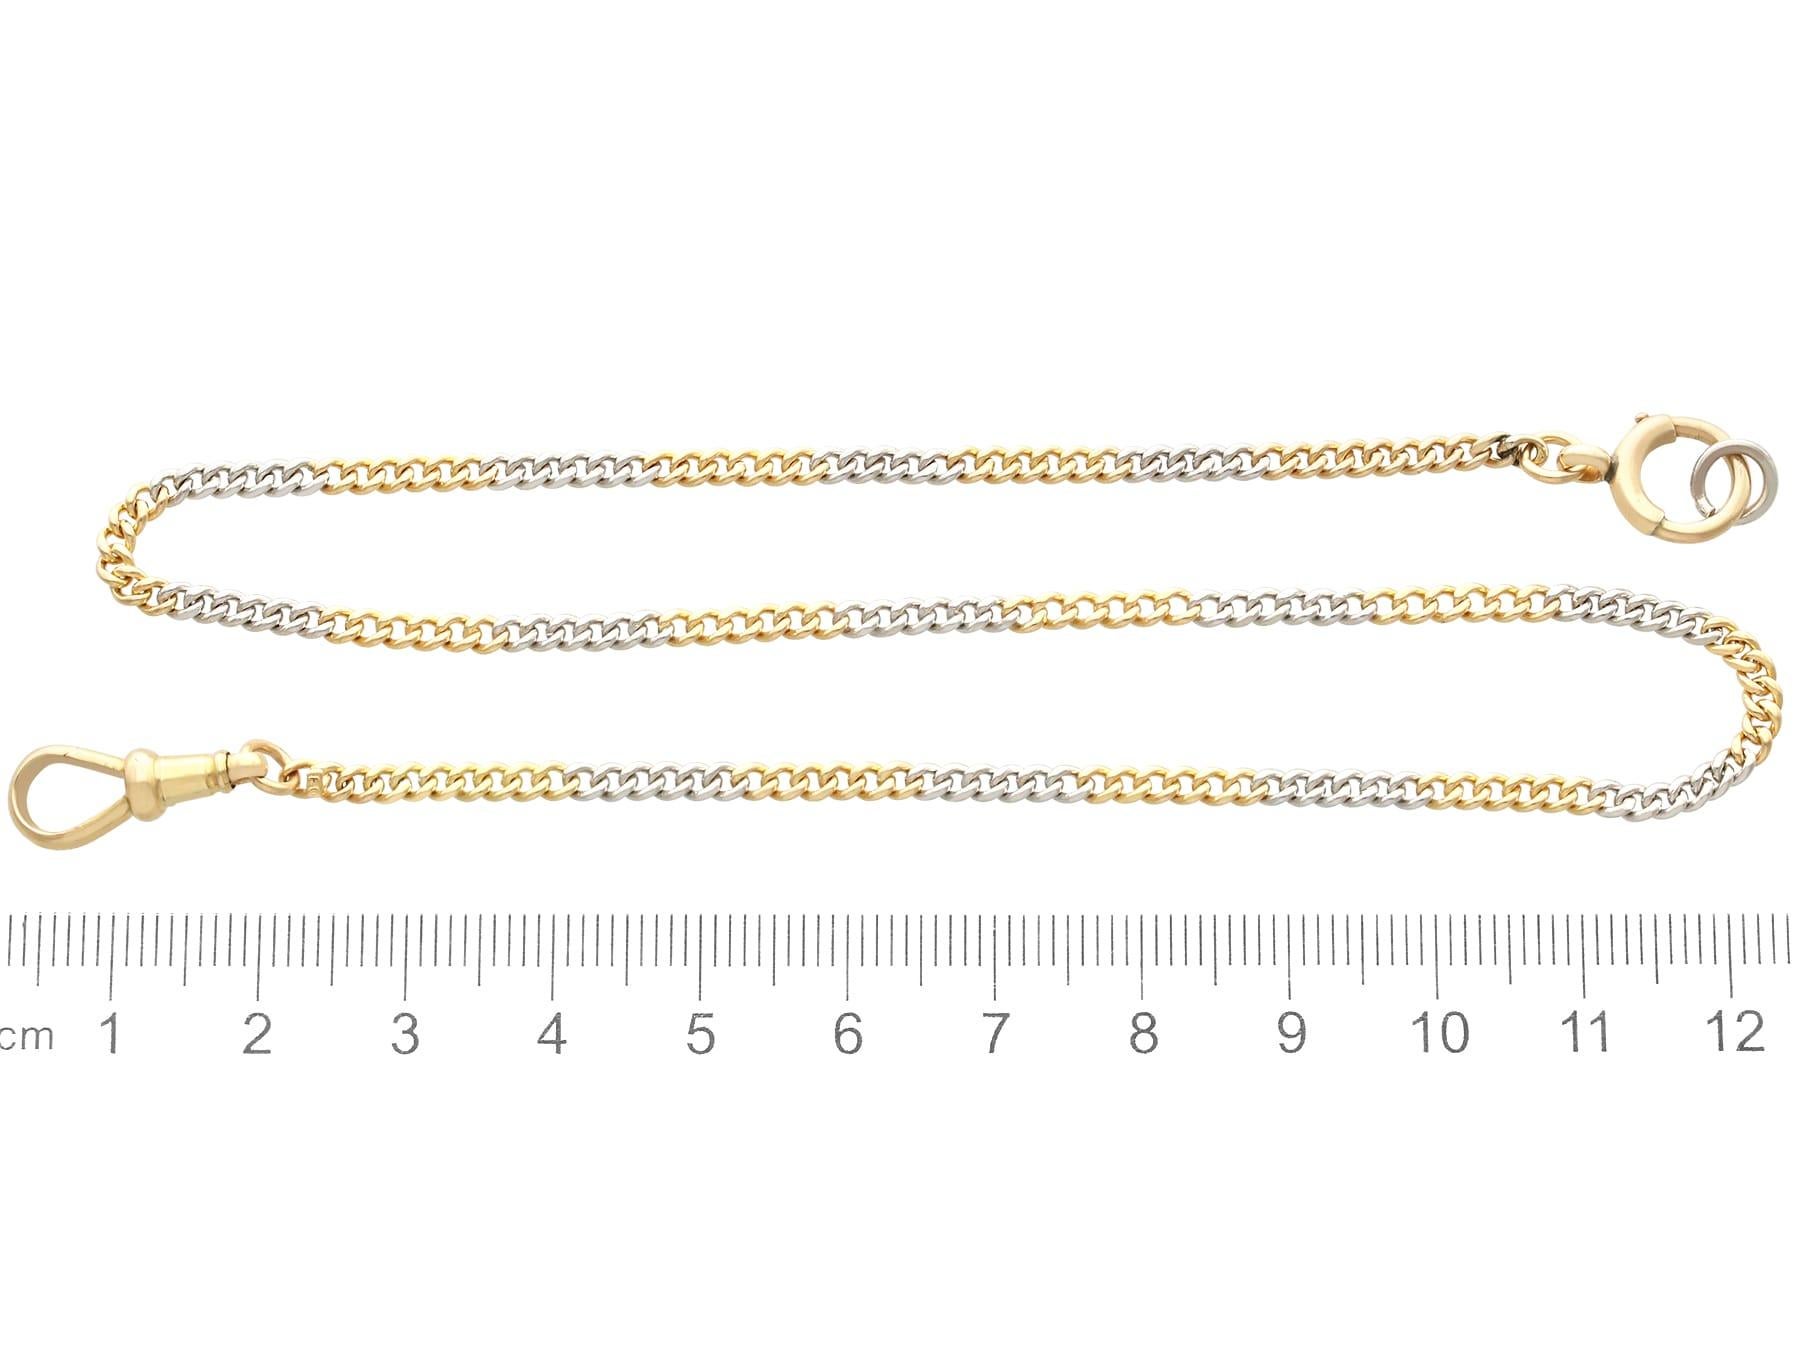 Antique 18k Yellow Gold and Platinum Ladies Fob Watch Chain Circa 1910 For Sale 2